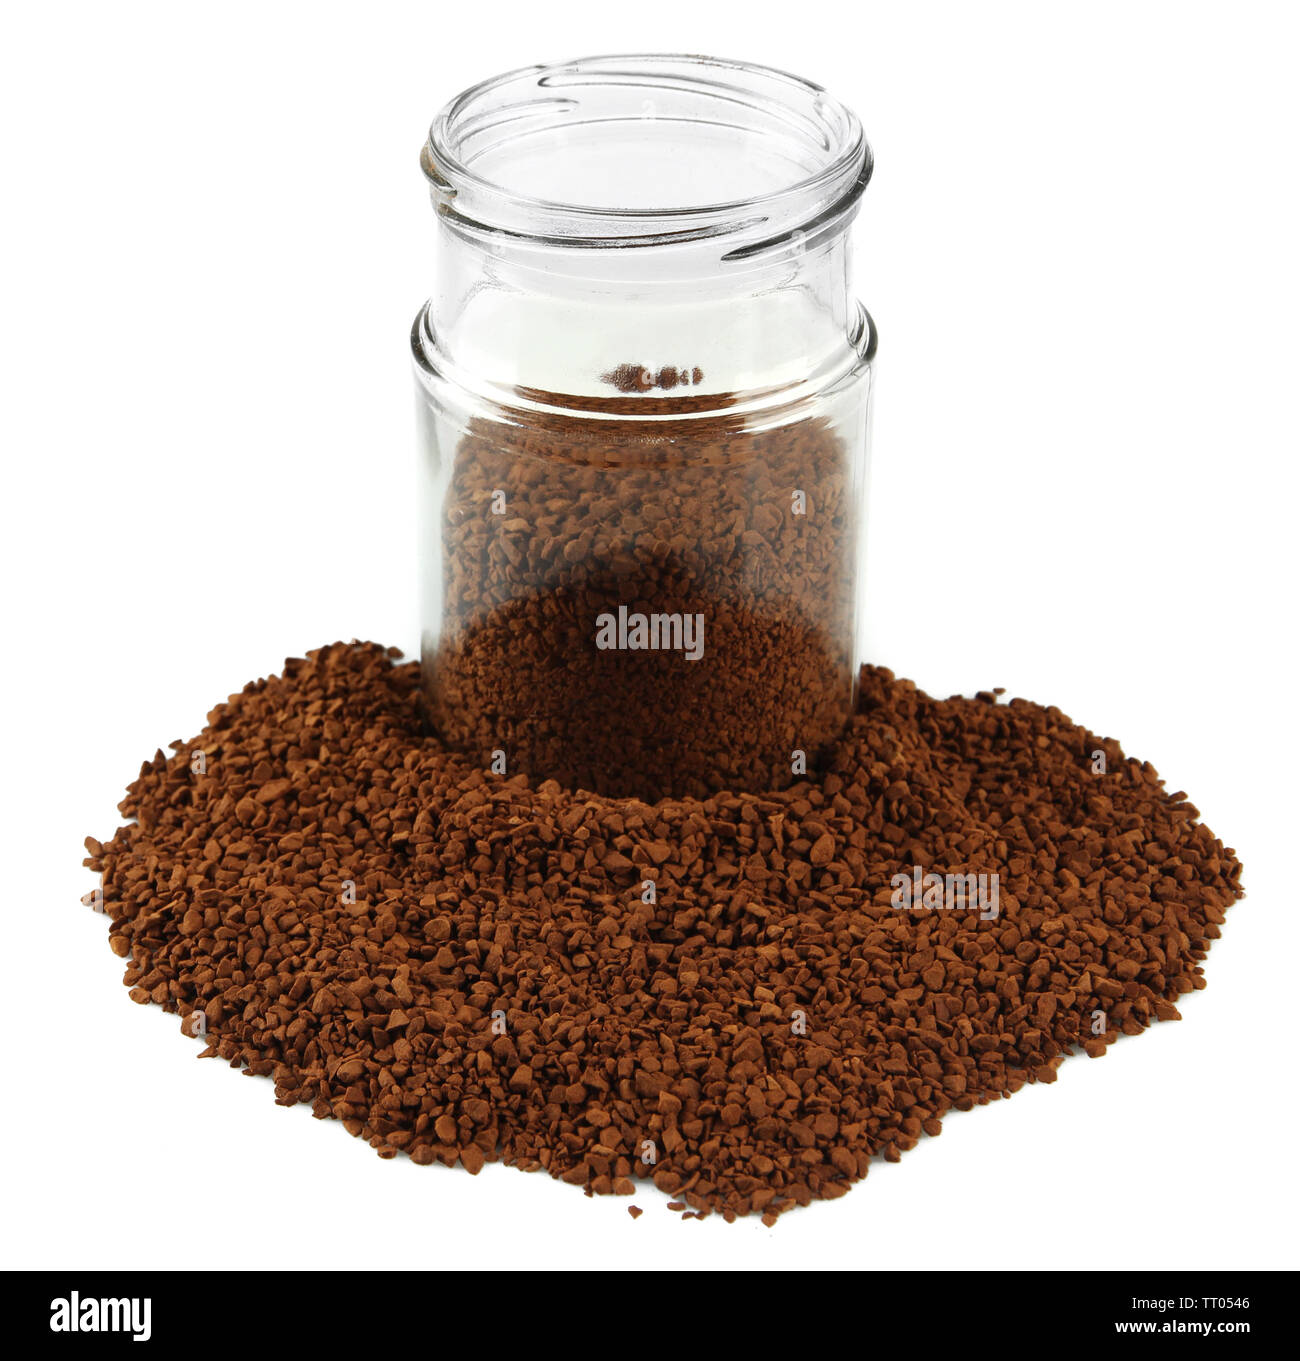 60+ Coffee Jar Instant Coffee Packaging Stock Photos, Pictures